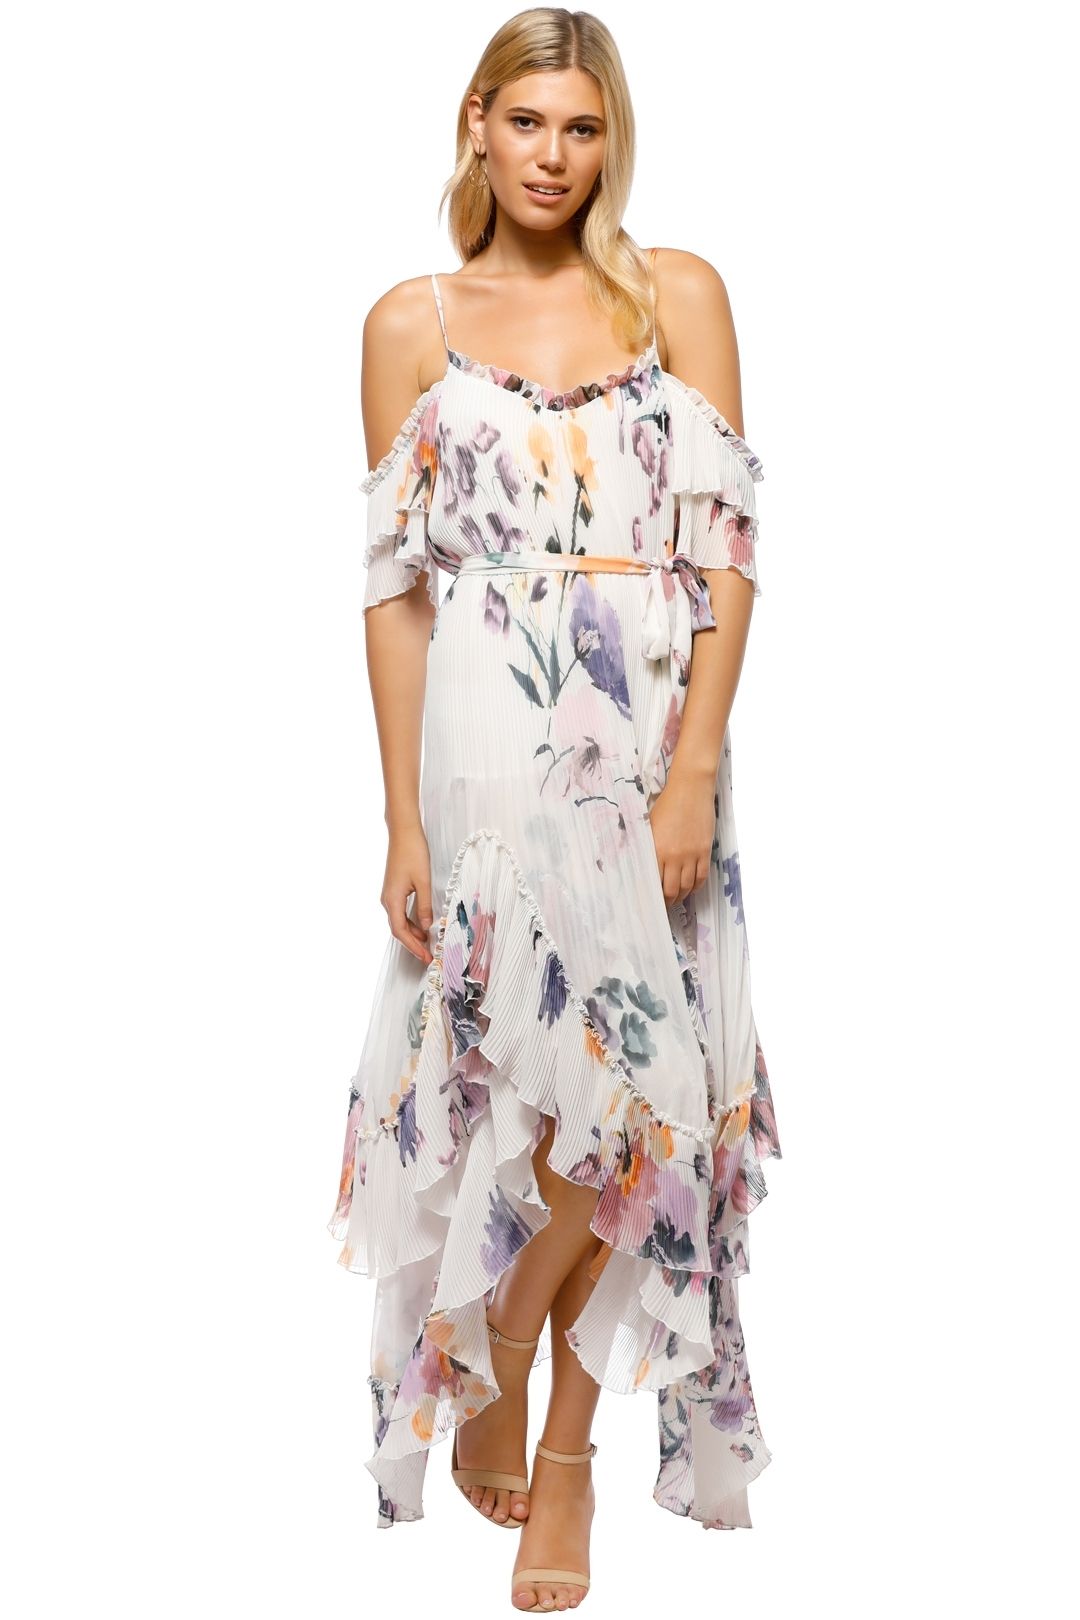 We Are Kindred - Catarina Pleat Maxi Dress - White Floral - Front